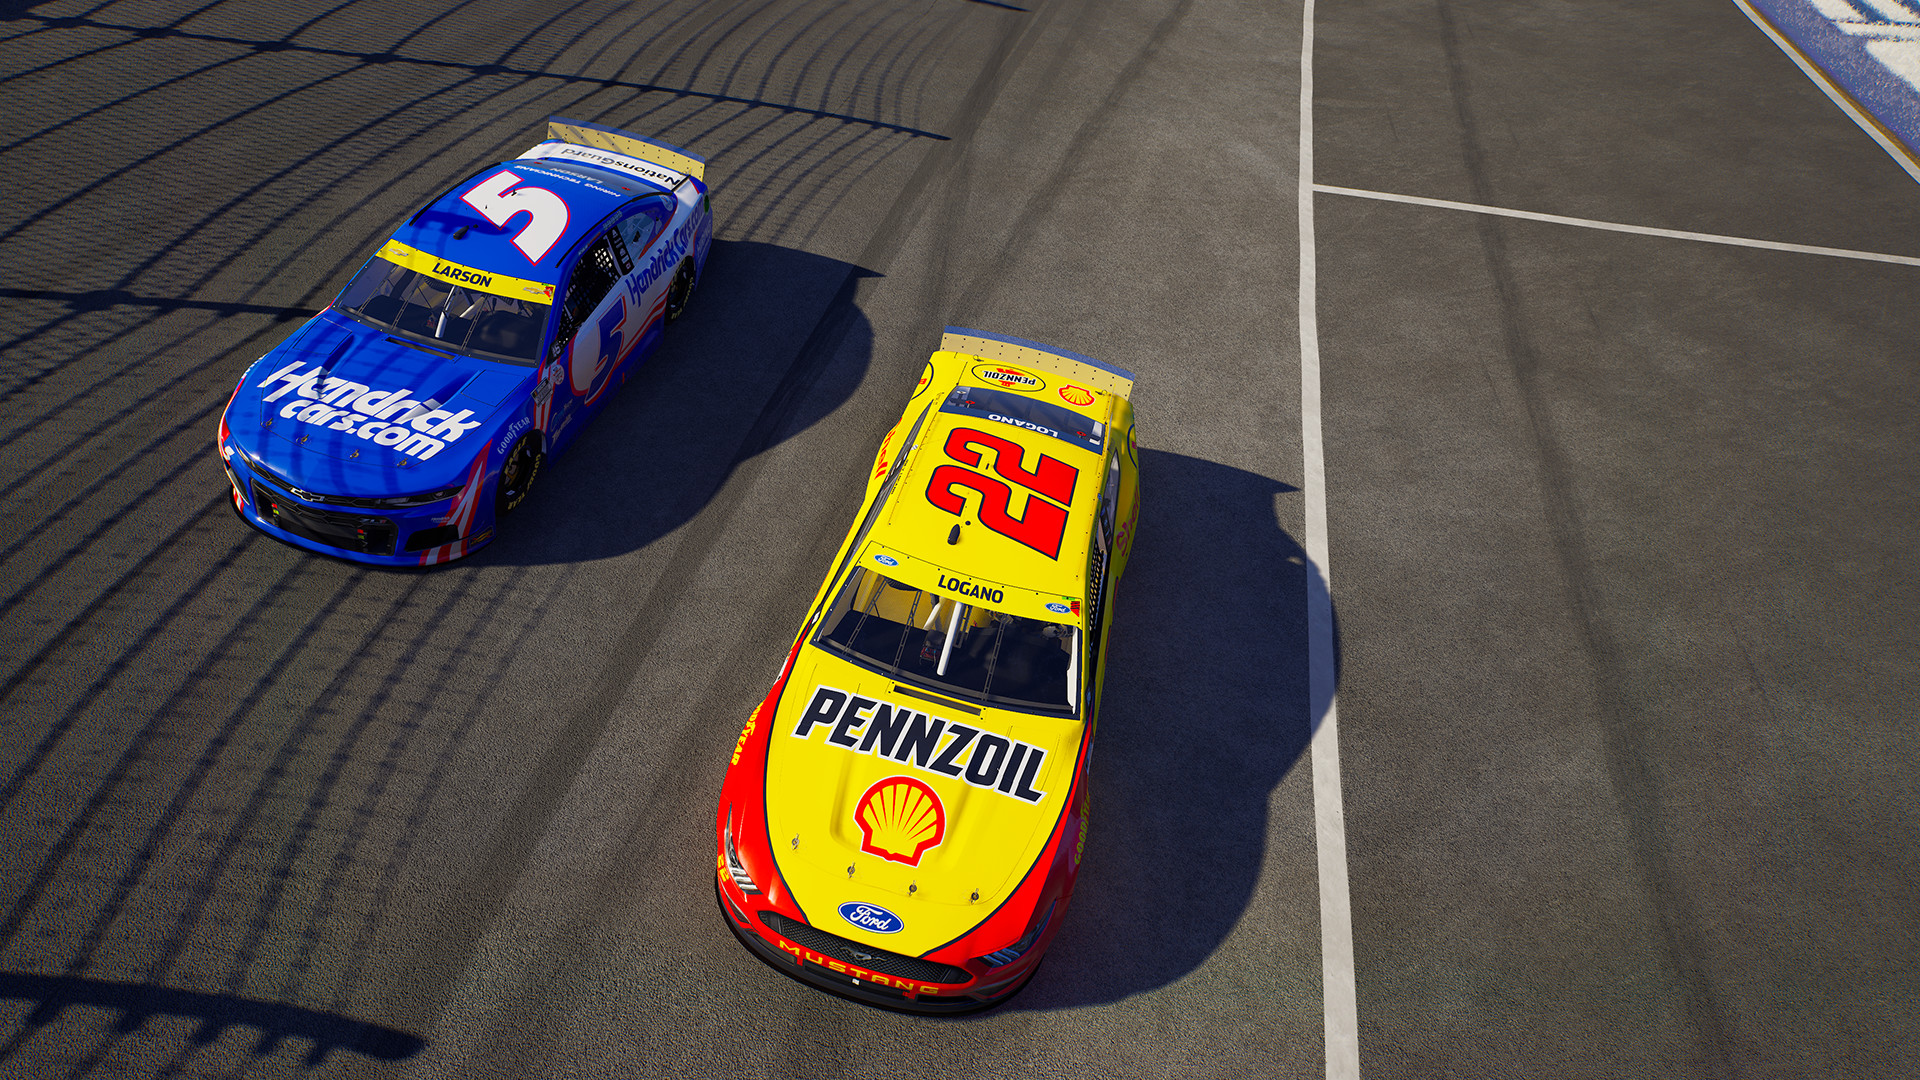 NASCAR 21: Ignition - Playoff Pack Featured Screenshot #1